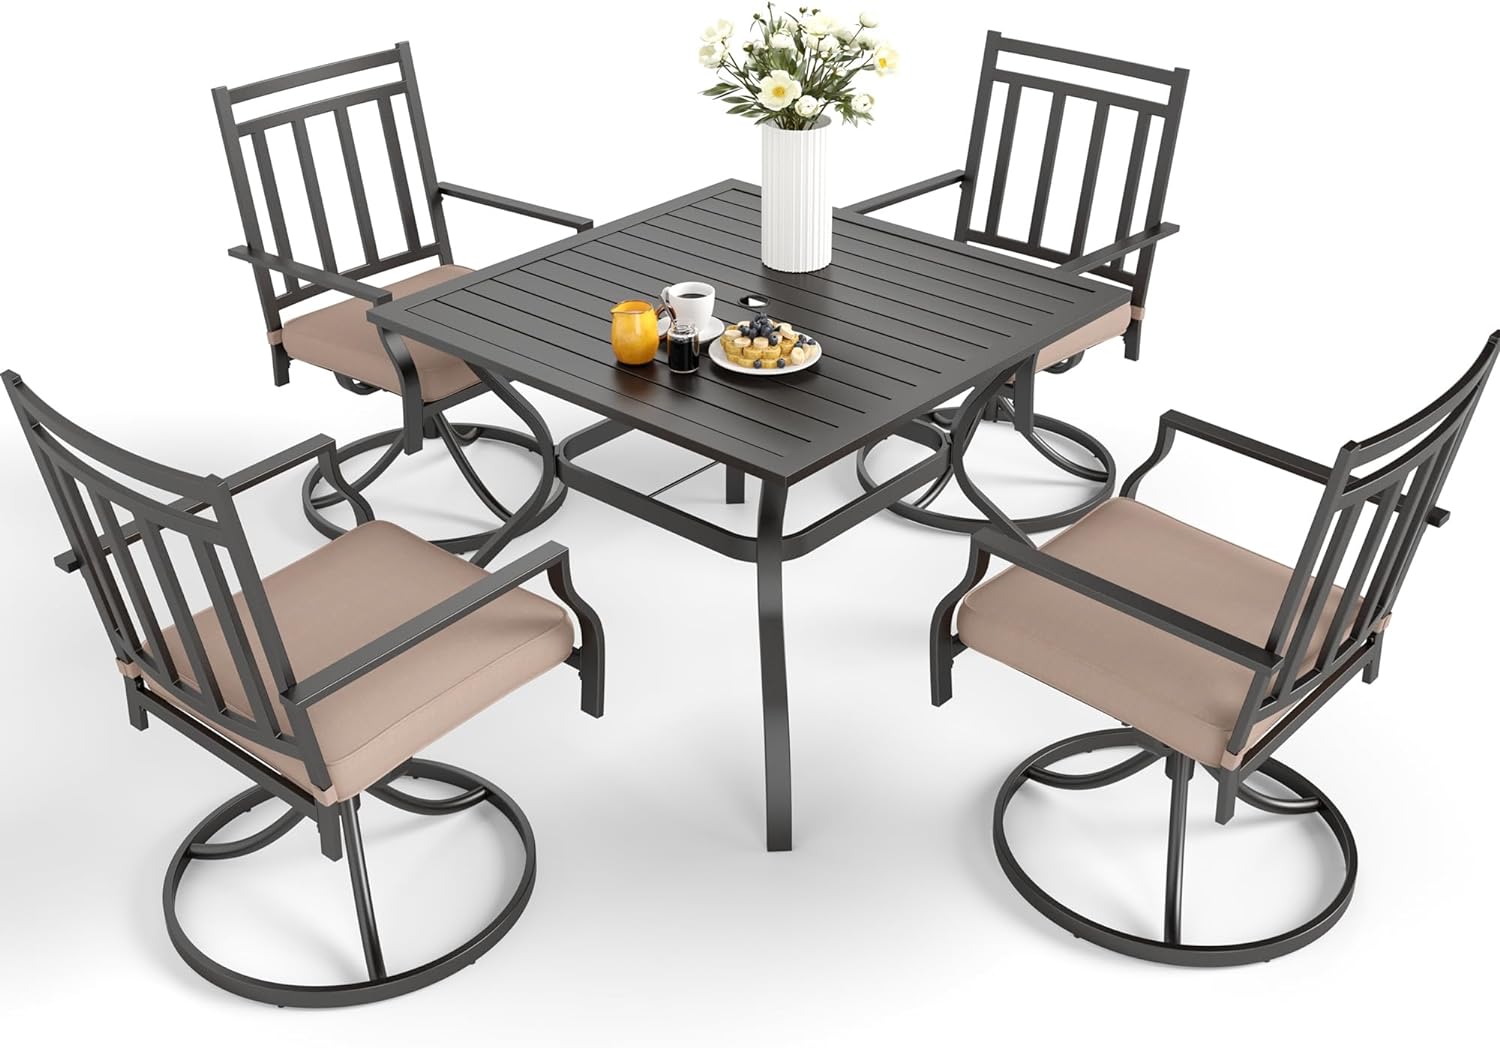 MFSTUDIO 5-Pieces Metal Outdoor Patio Furniture Dining Set, 4 Metal Swivel Chairs and Square Dining Table with Umbrella Hole, Black